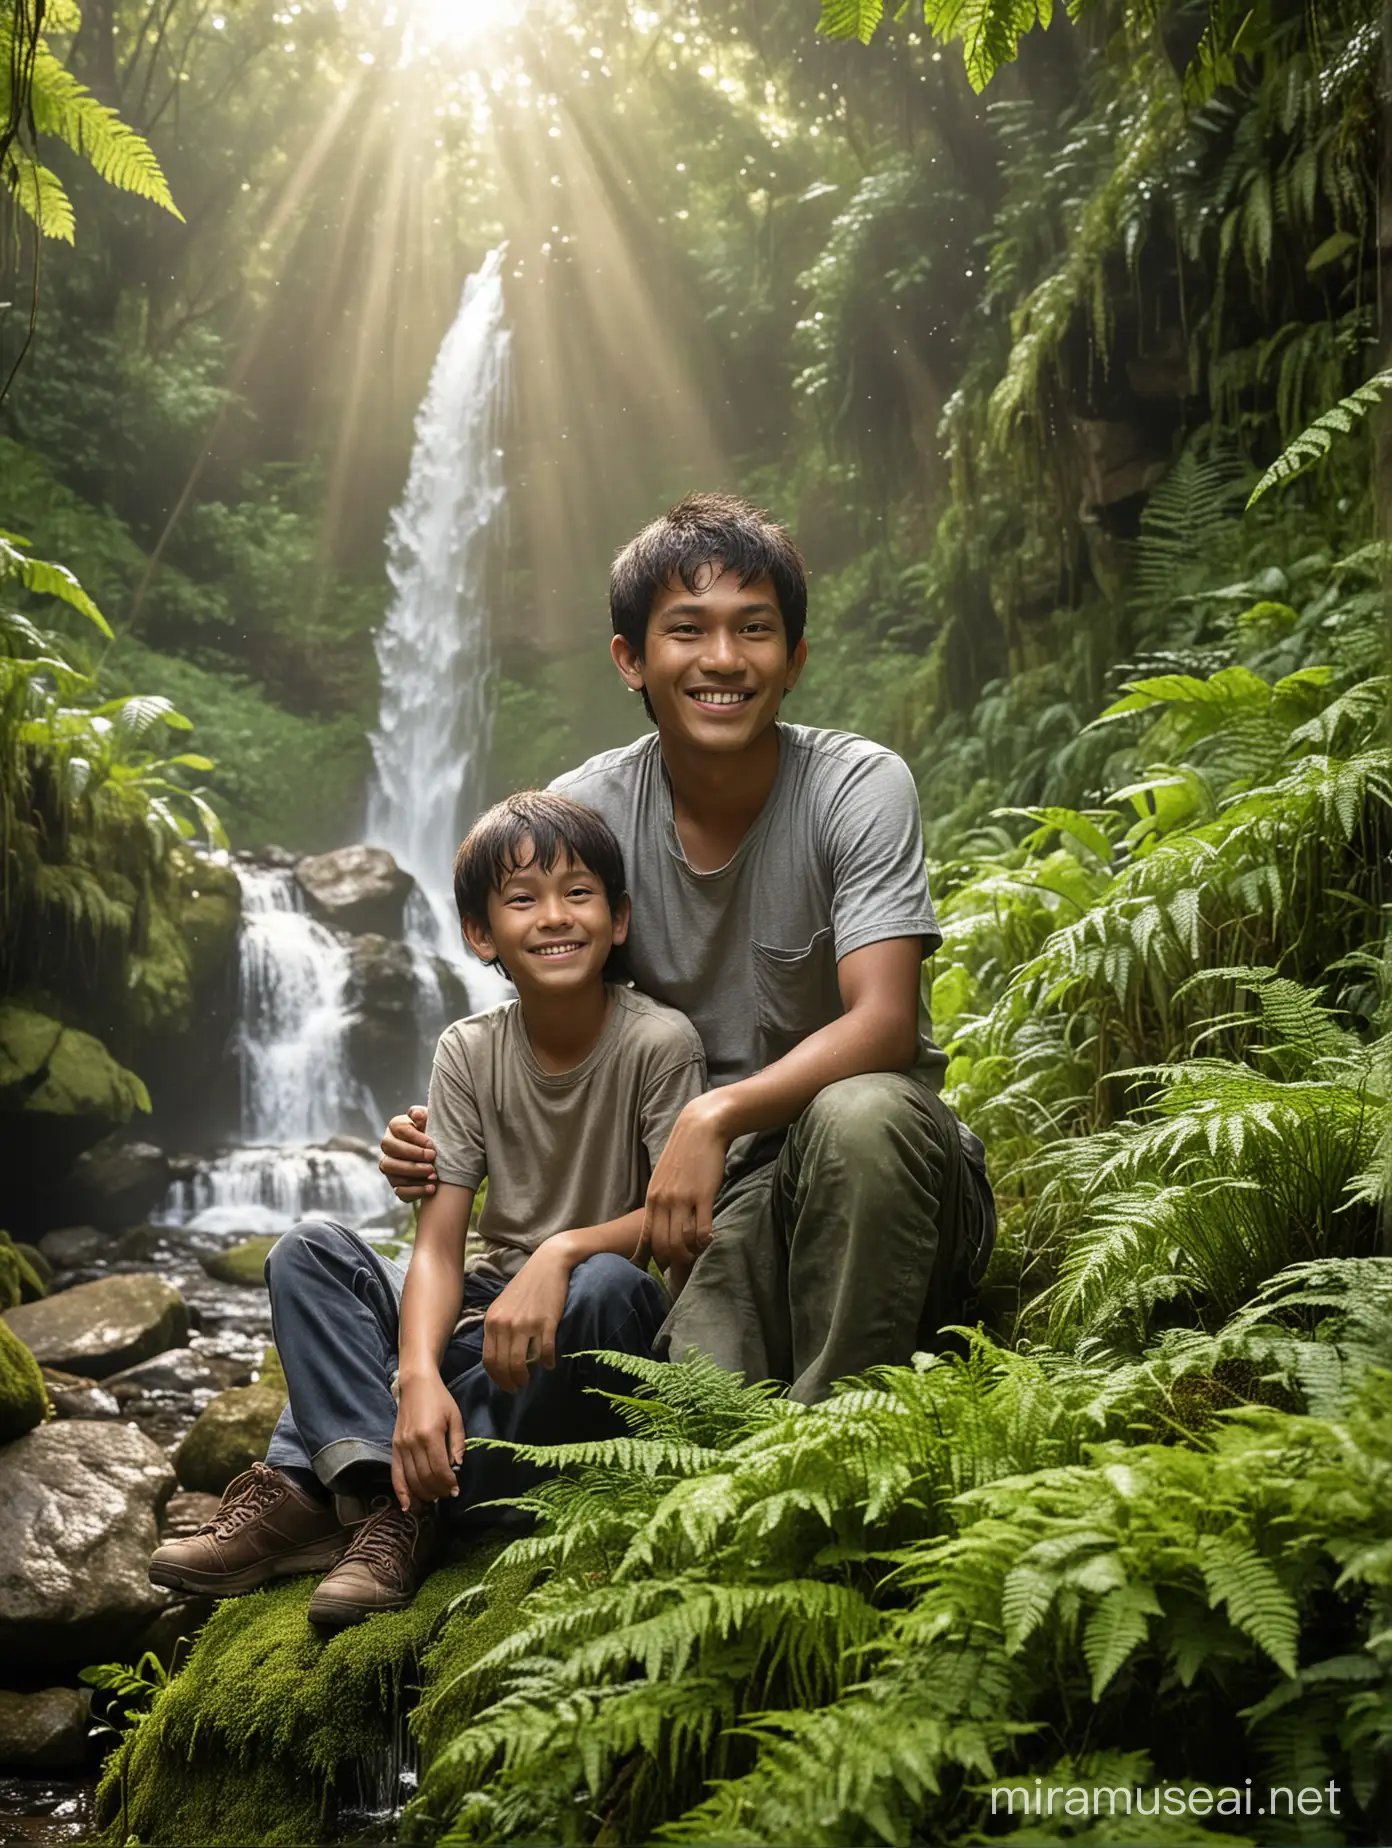 Father and Son Smiling Together in Enchanted Forest with Waterfall